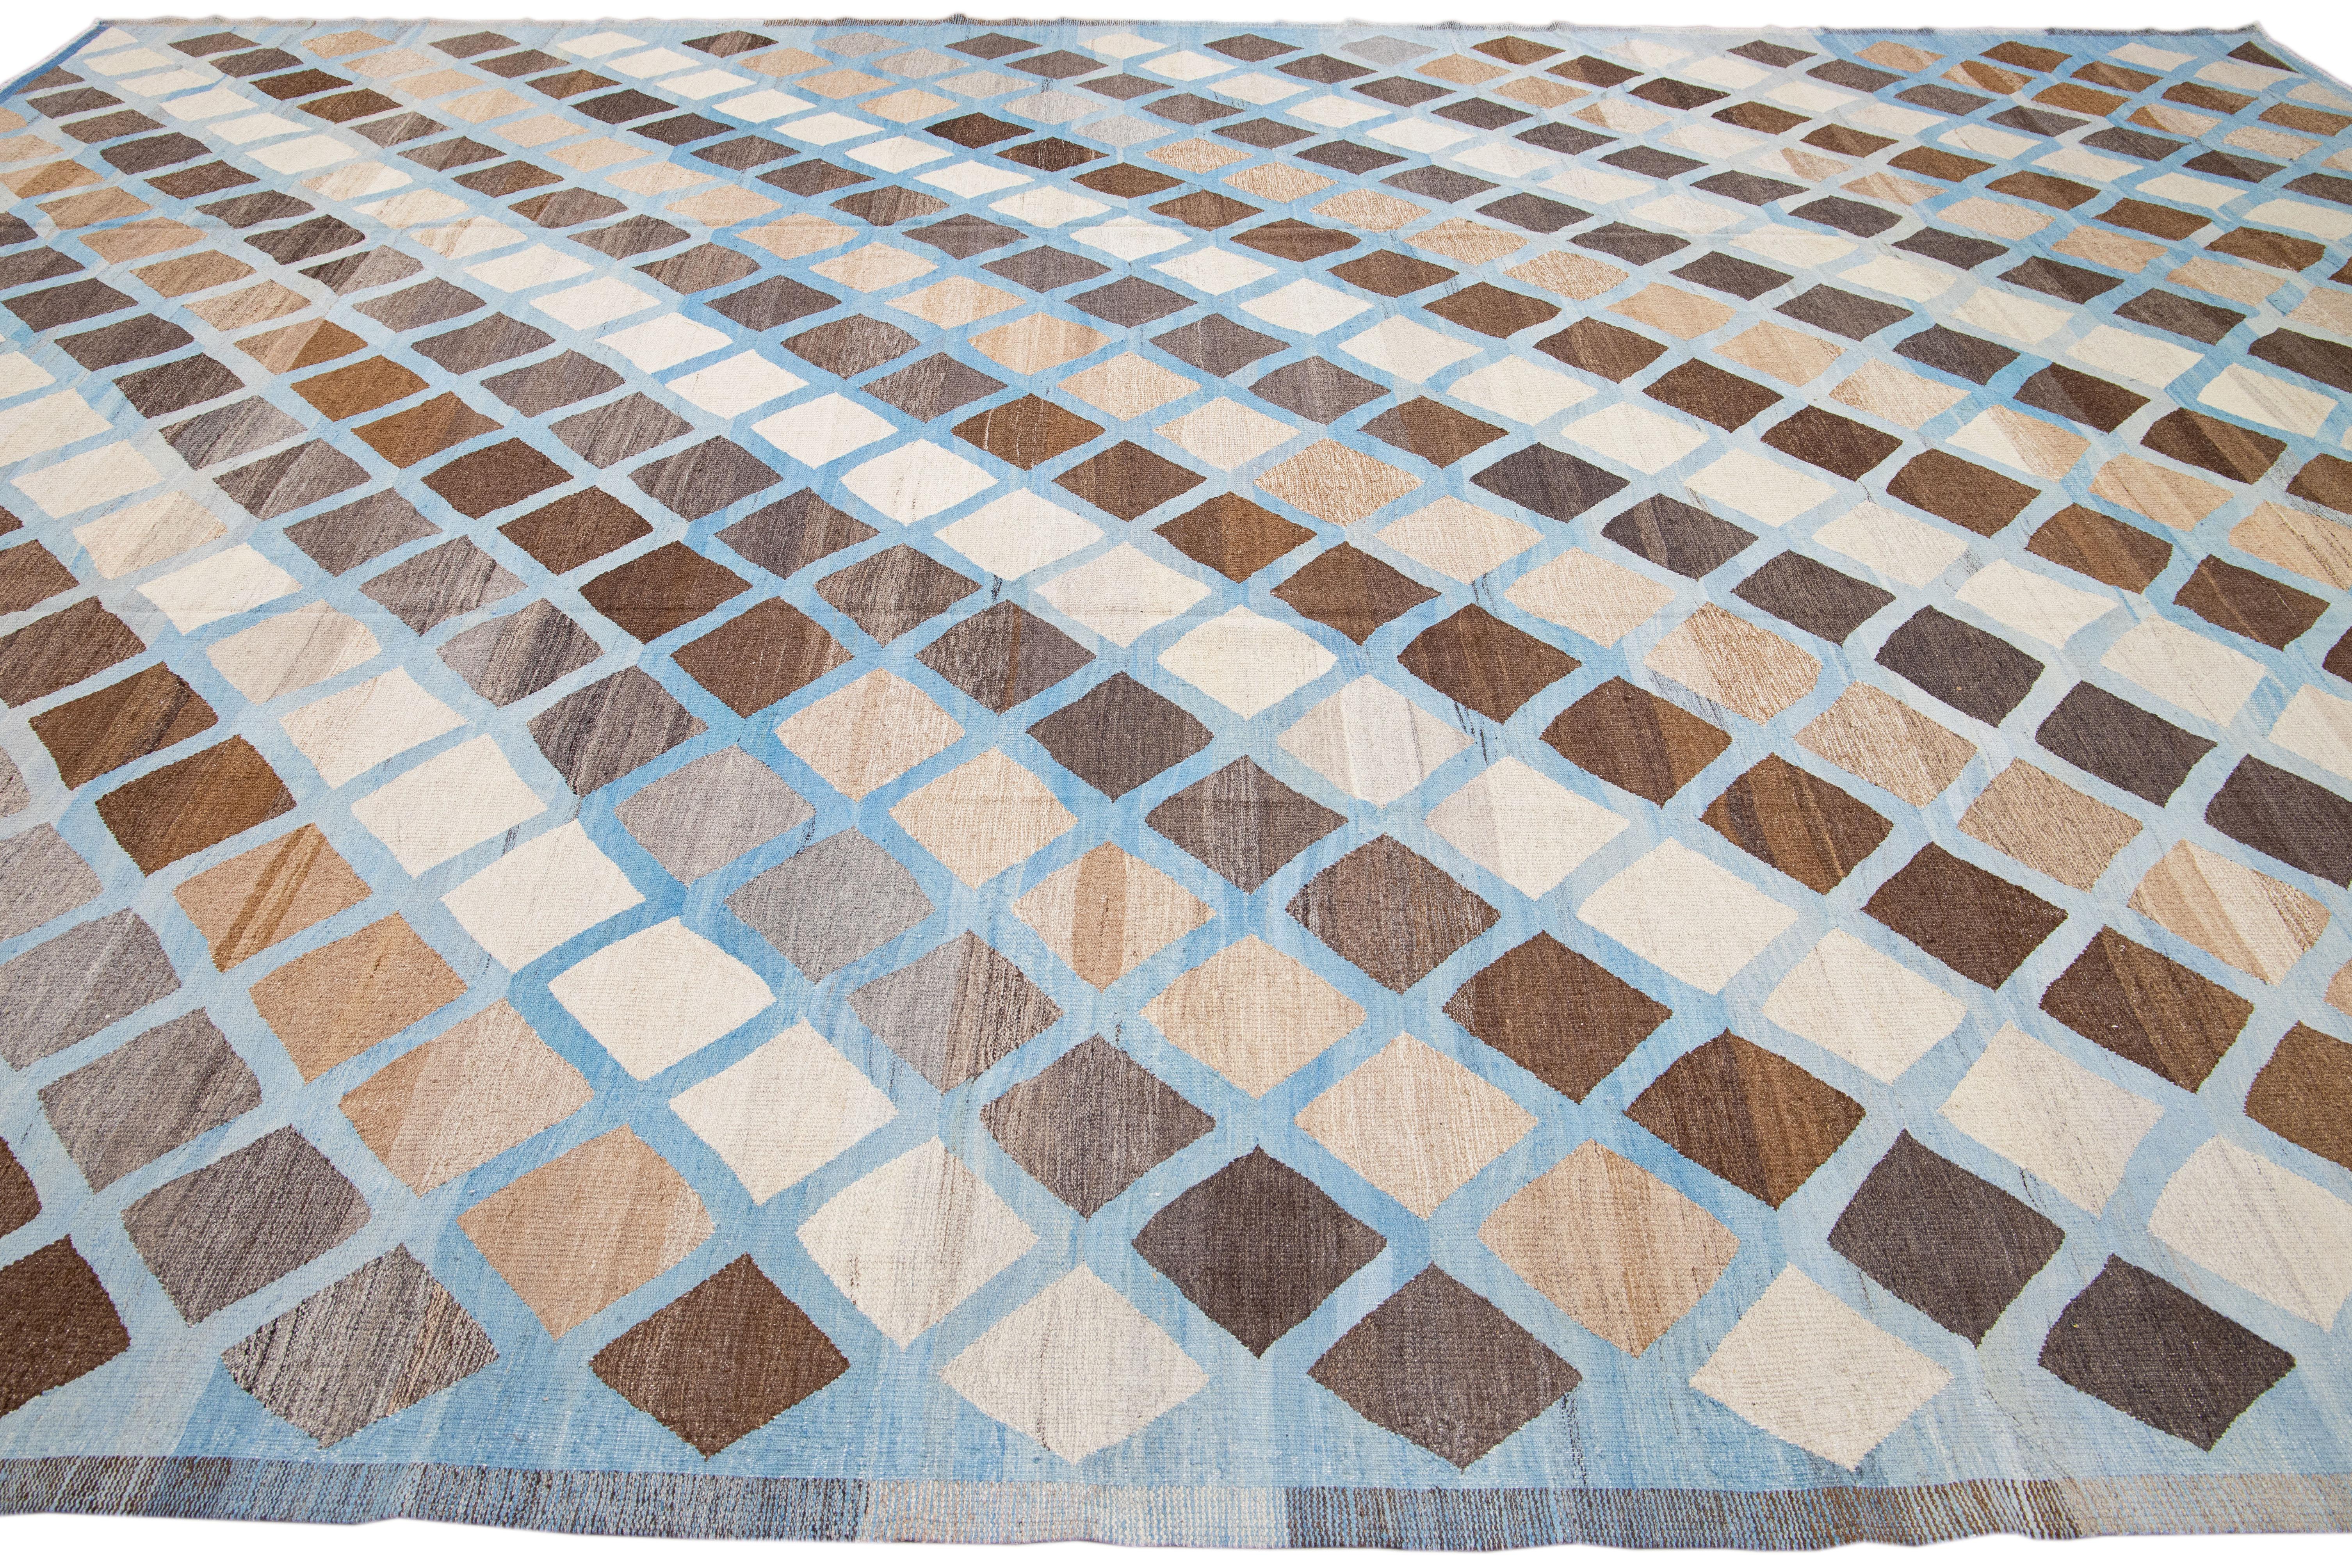 Modern Kilim Flat-Weave Geometric Blue and Brown Oversize Wool Rug In New Condition For Sale In Norwalk, CT